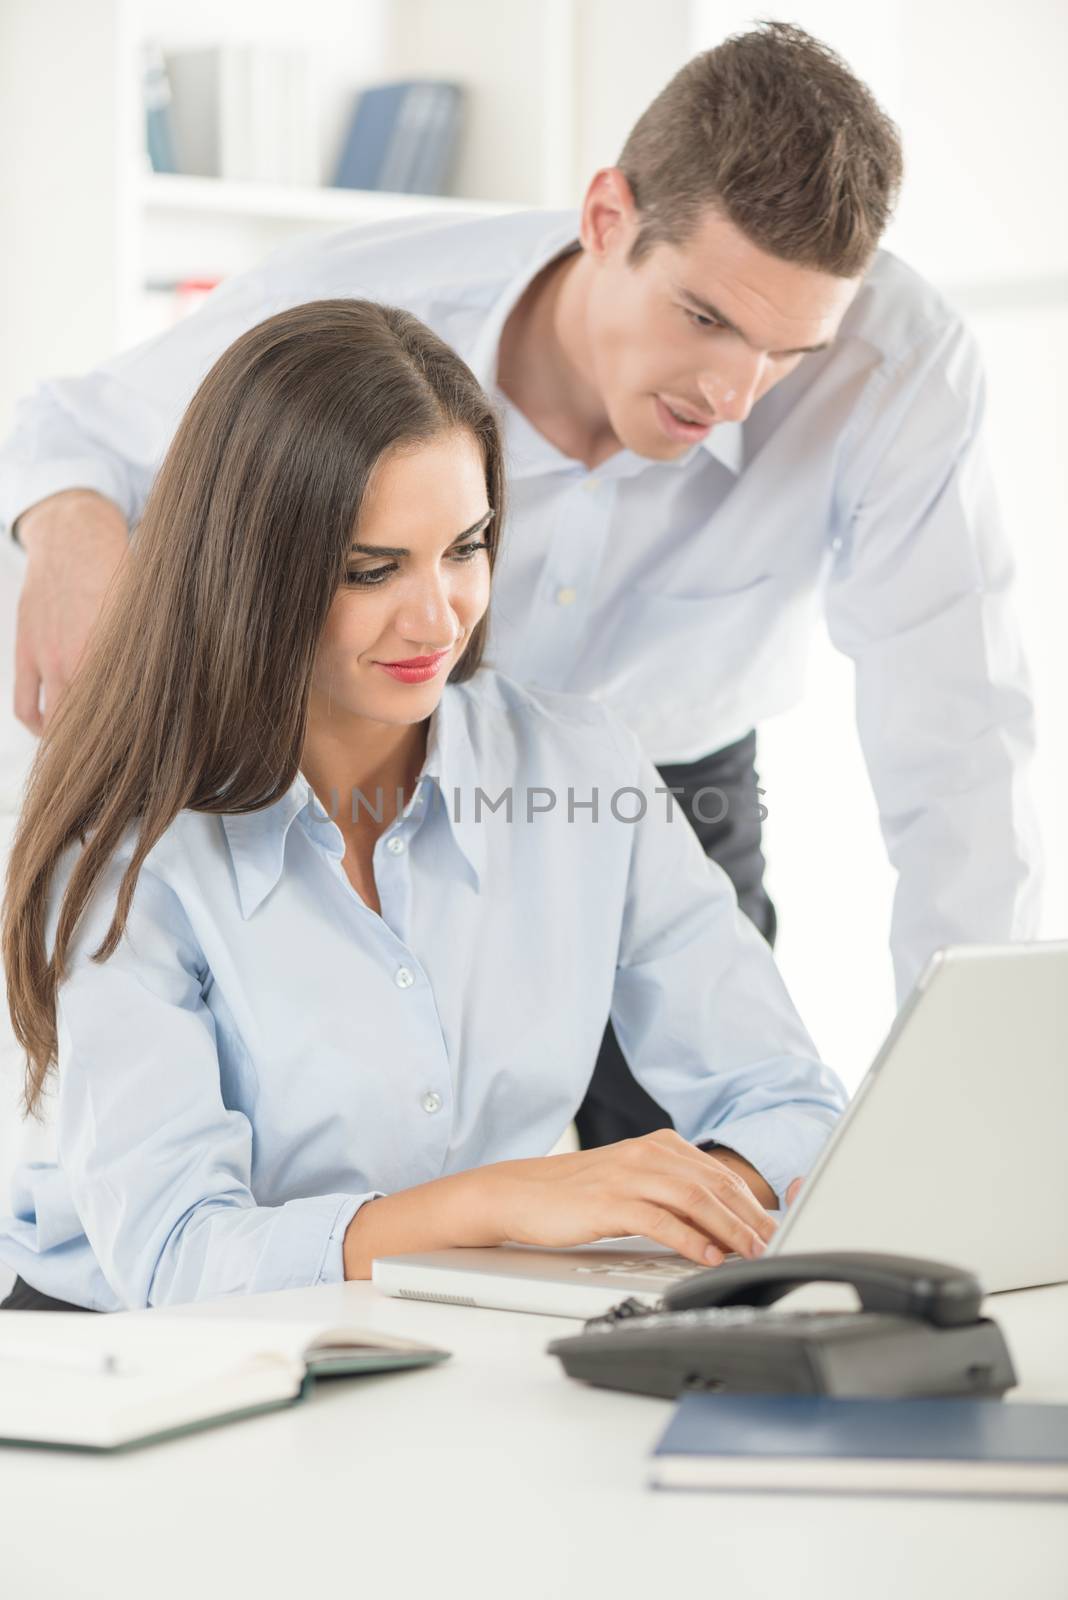 Two young business people in office, woman sitting at an office desk and typing on laptop, behind her standing a young businessman and looking at laptop.